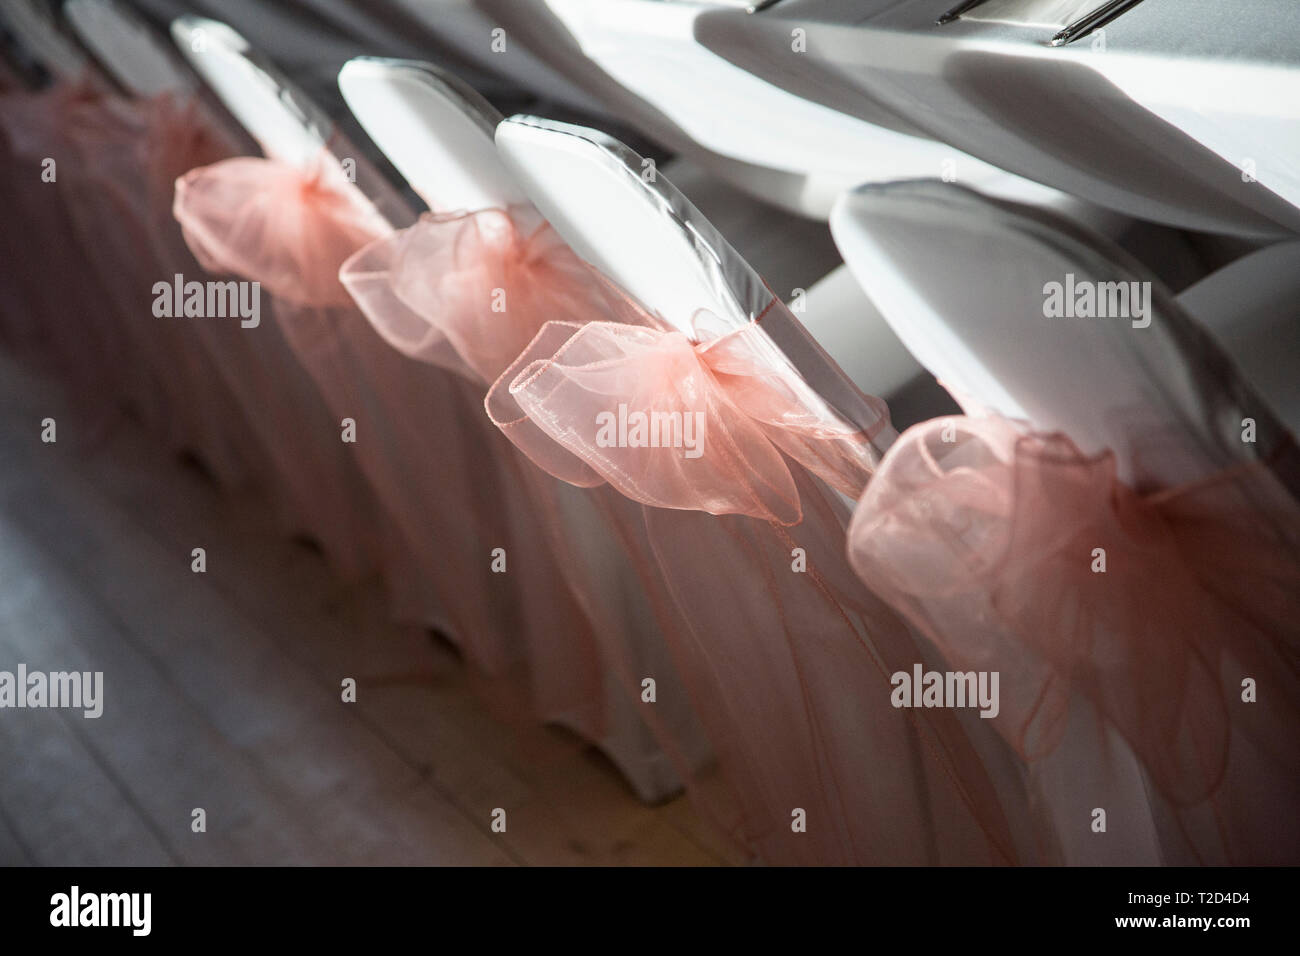 Wedding Day chair covers with baby pink ribbons around the chairs at a wedding reception on a bright sunny day Stock Photo